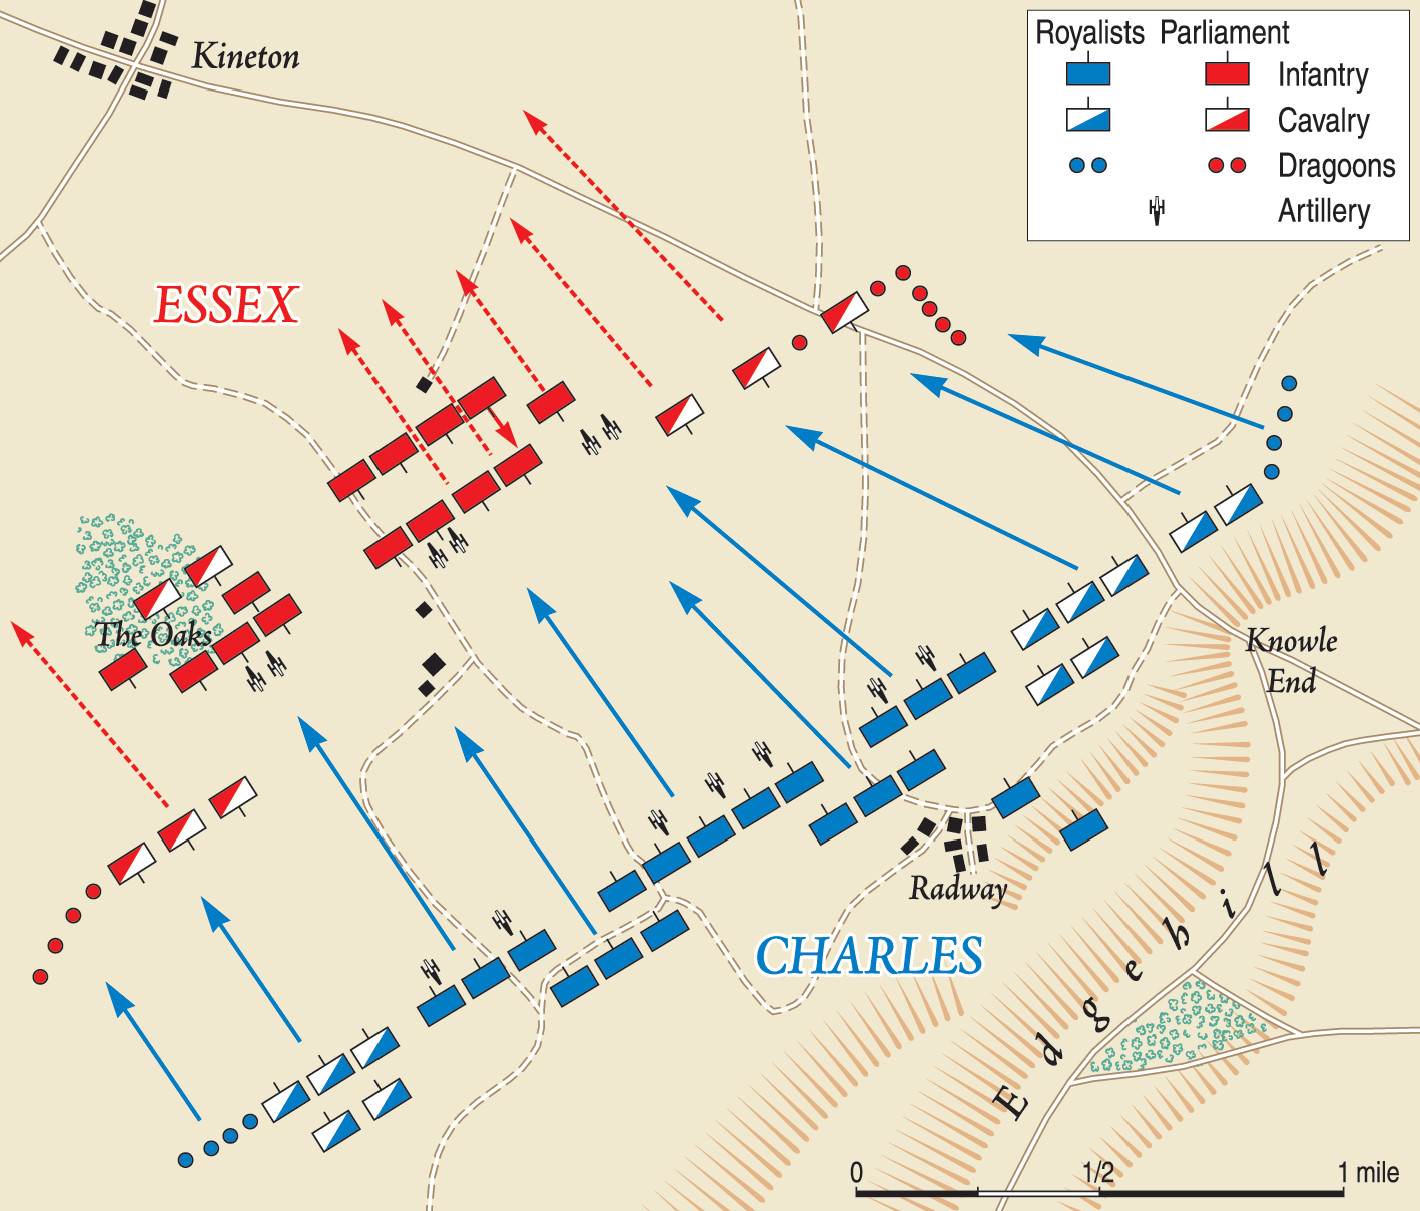 Although holding the high ground between the Roundheads and London, King Charles decided to take the offensive at Edgehill. It was a fateful decision.